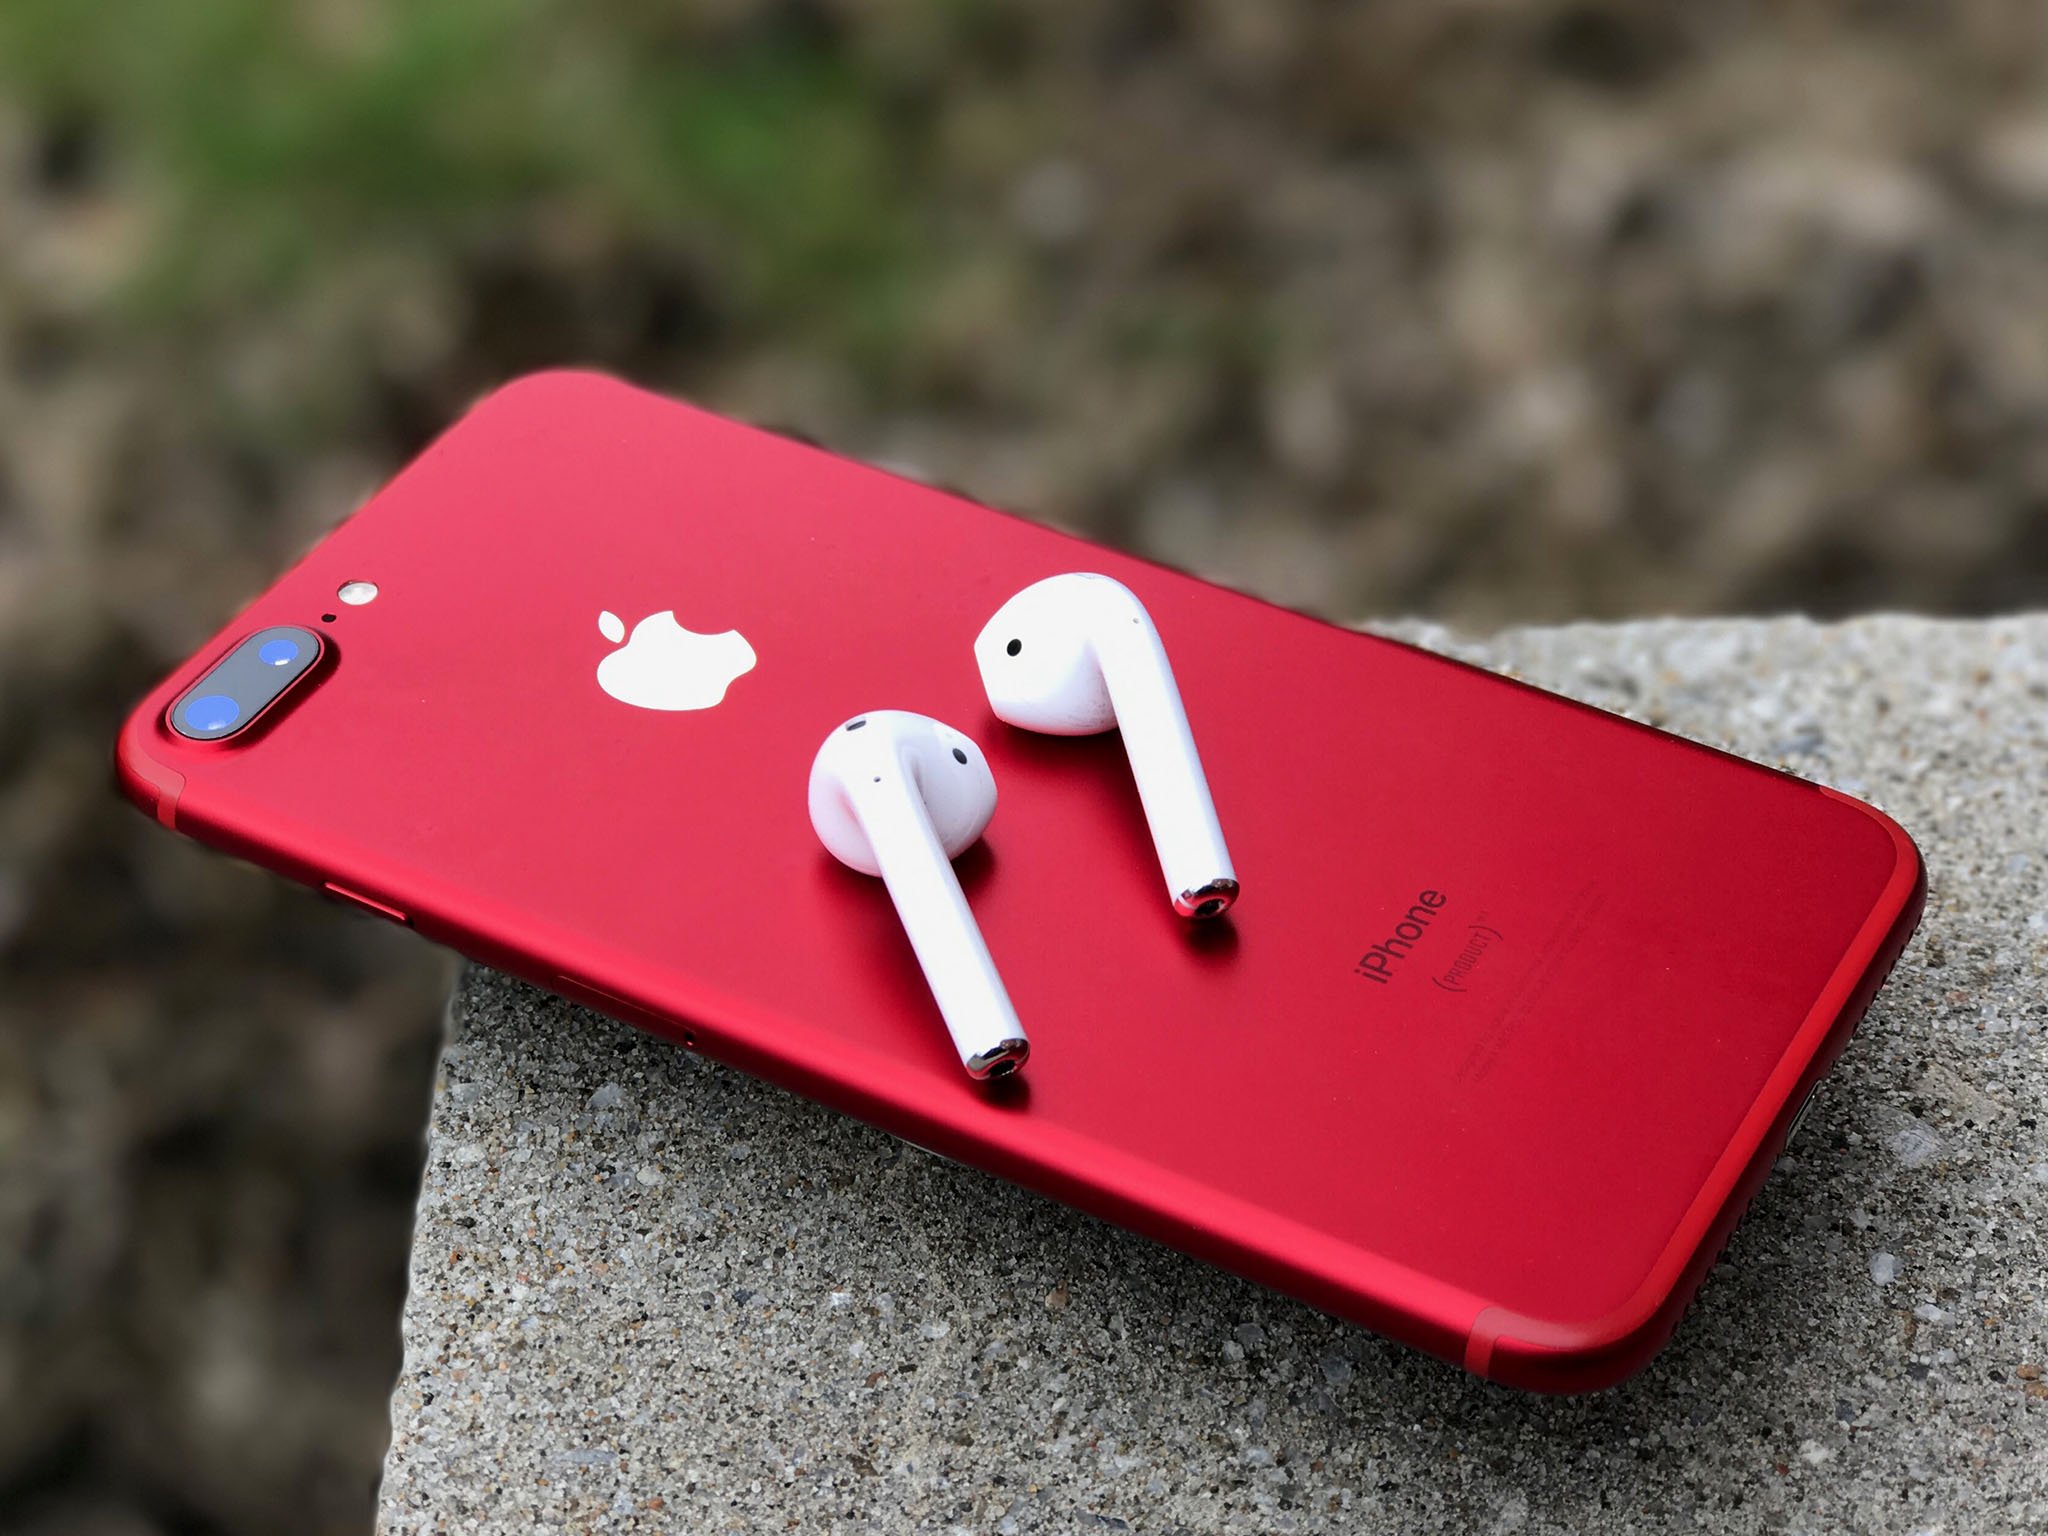 Surveys says you'll love AirPods and want to tell all your friends